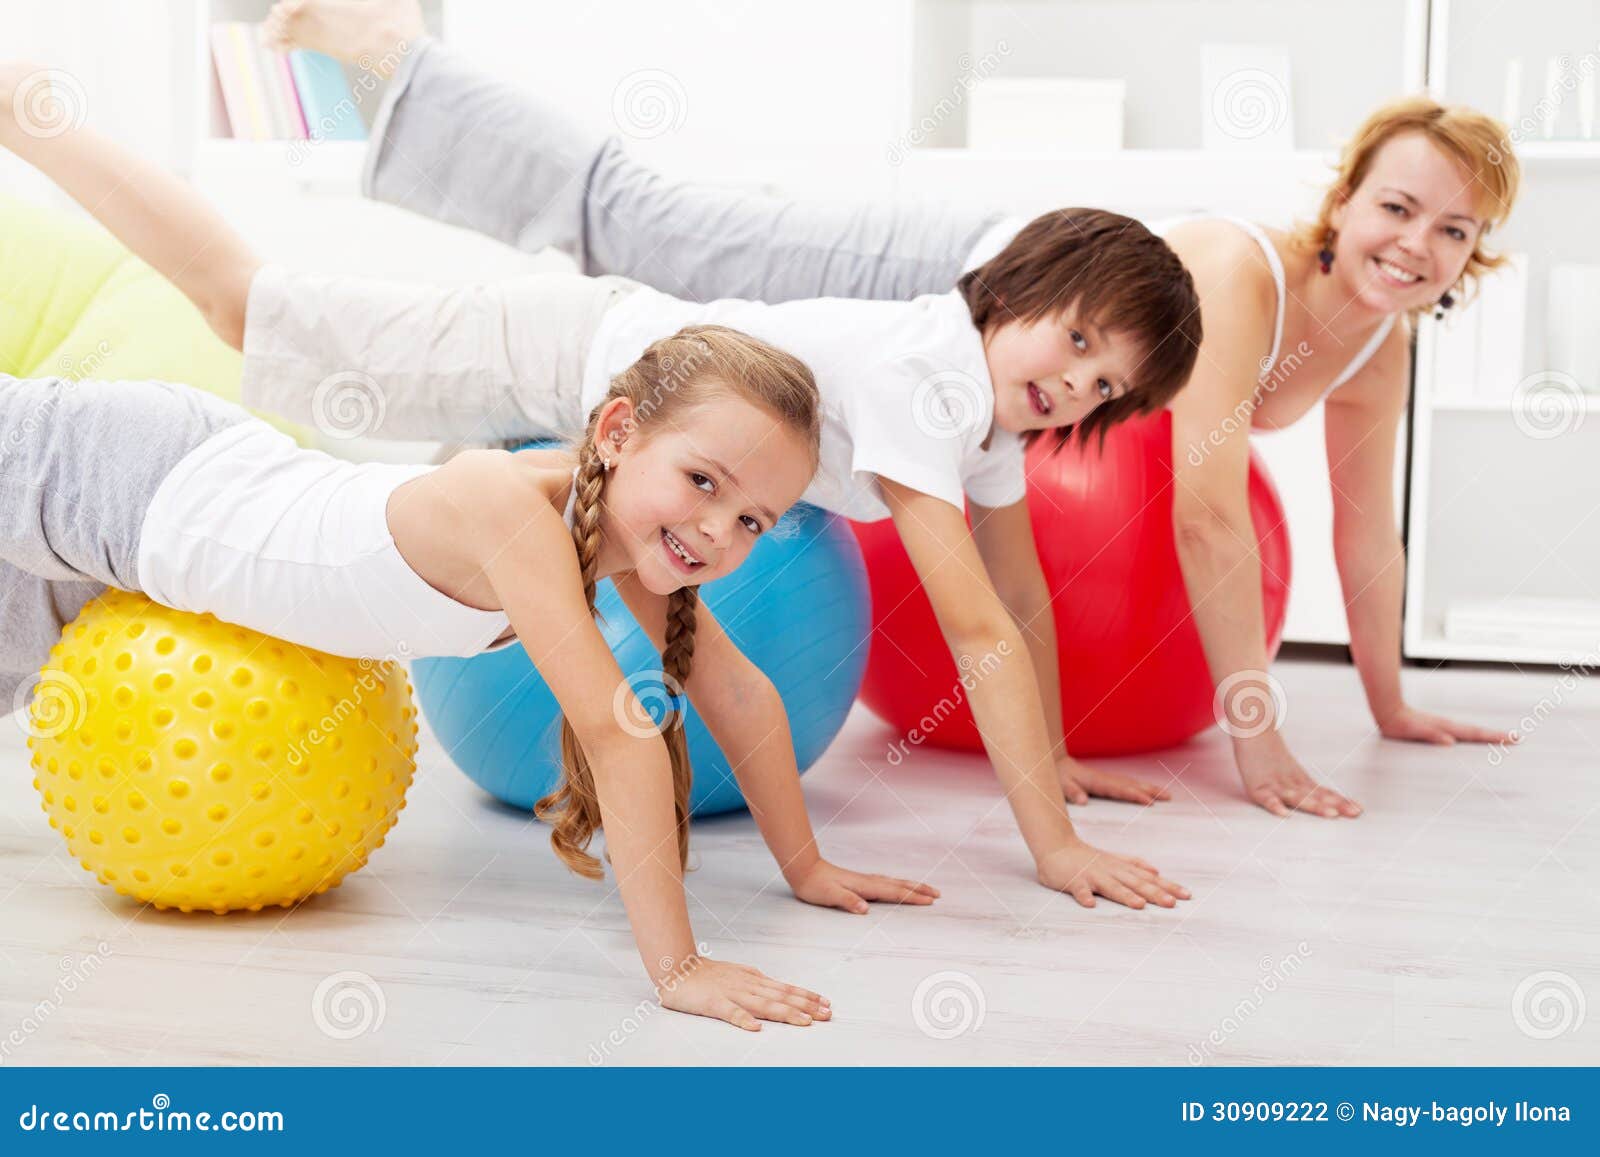 healthy people doing balancing exercise at home